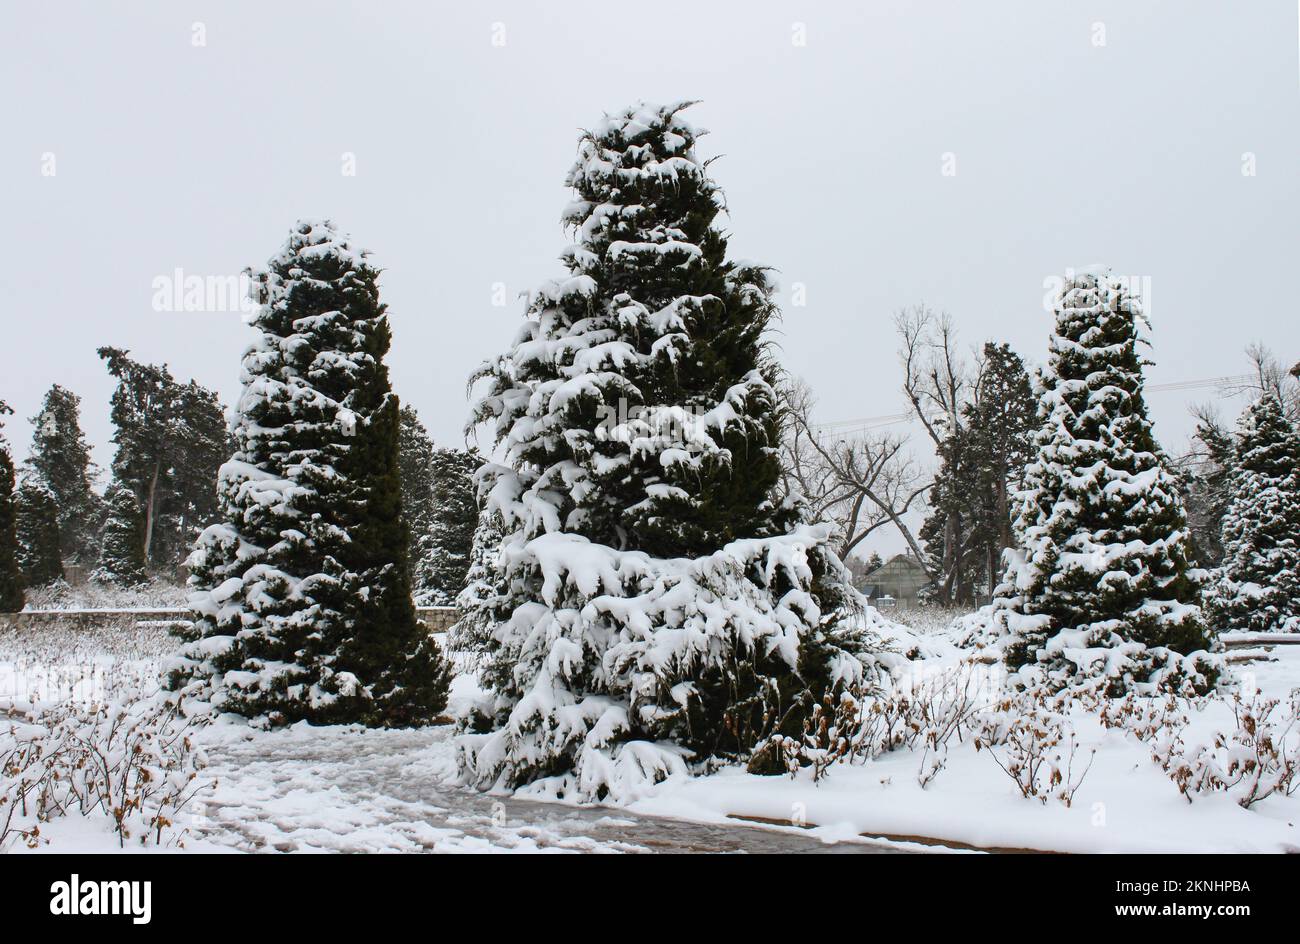 Ice and snow covered evergreen trees against a winter sky Stock Photo